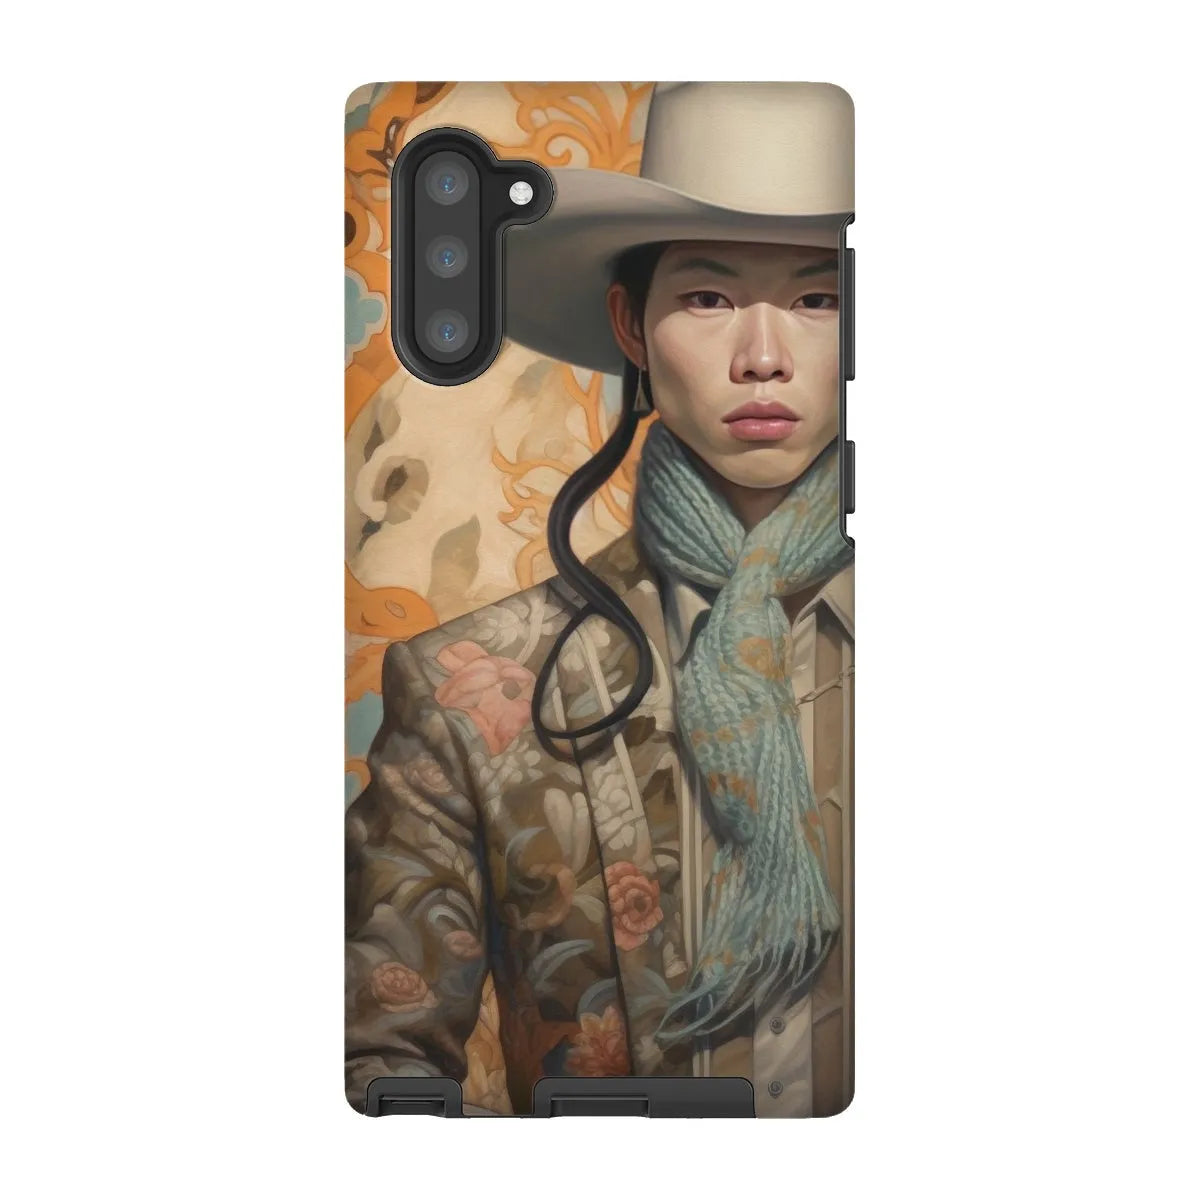 Baihu The Gay Cowboy - Gay Aesthetic Art Phone Case - Samsung Galaxy Note 10 / Matte - Mobile Phone Cases - Aesthetic